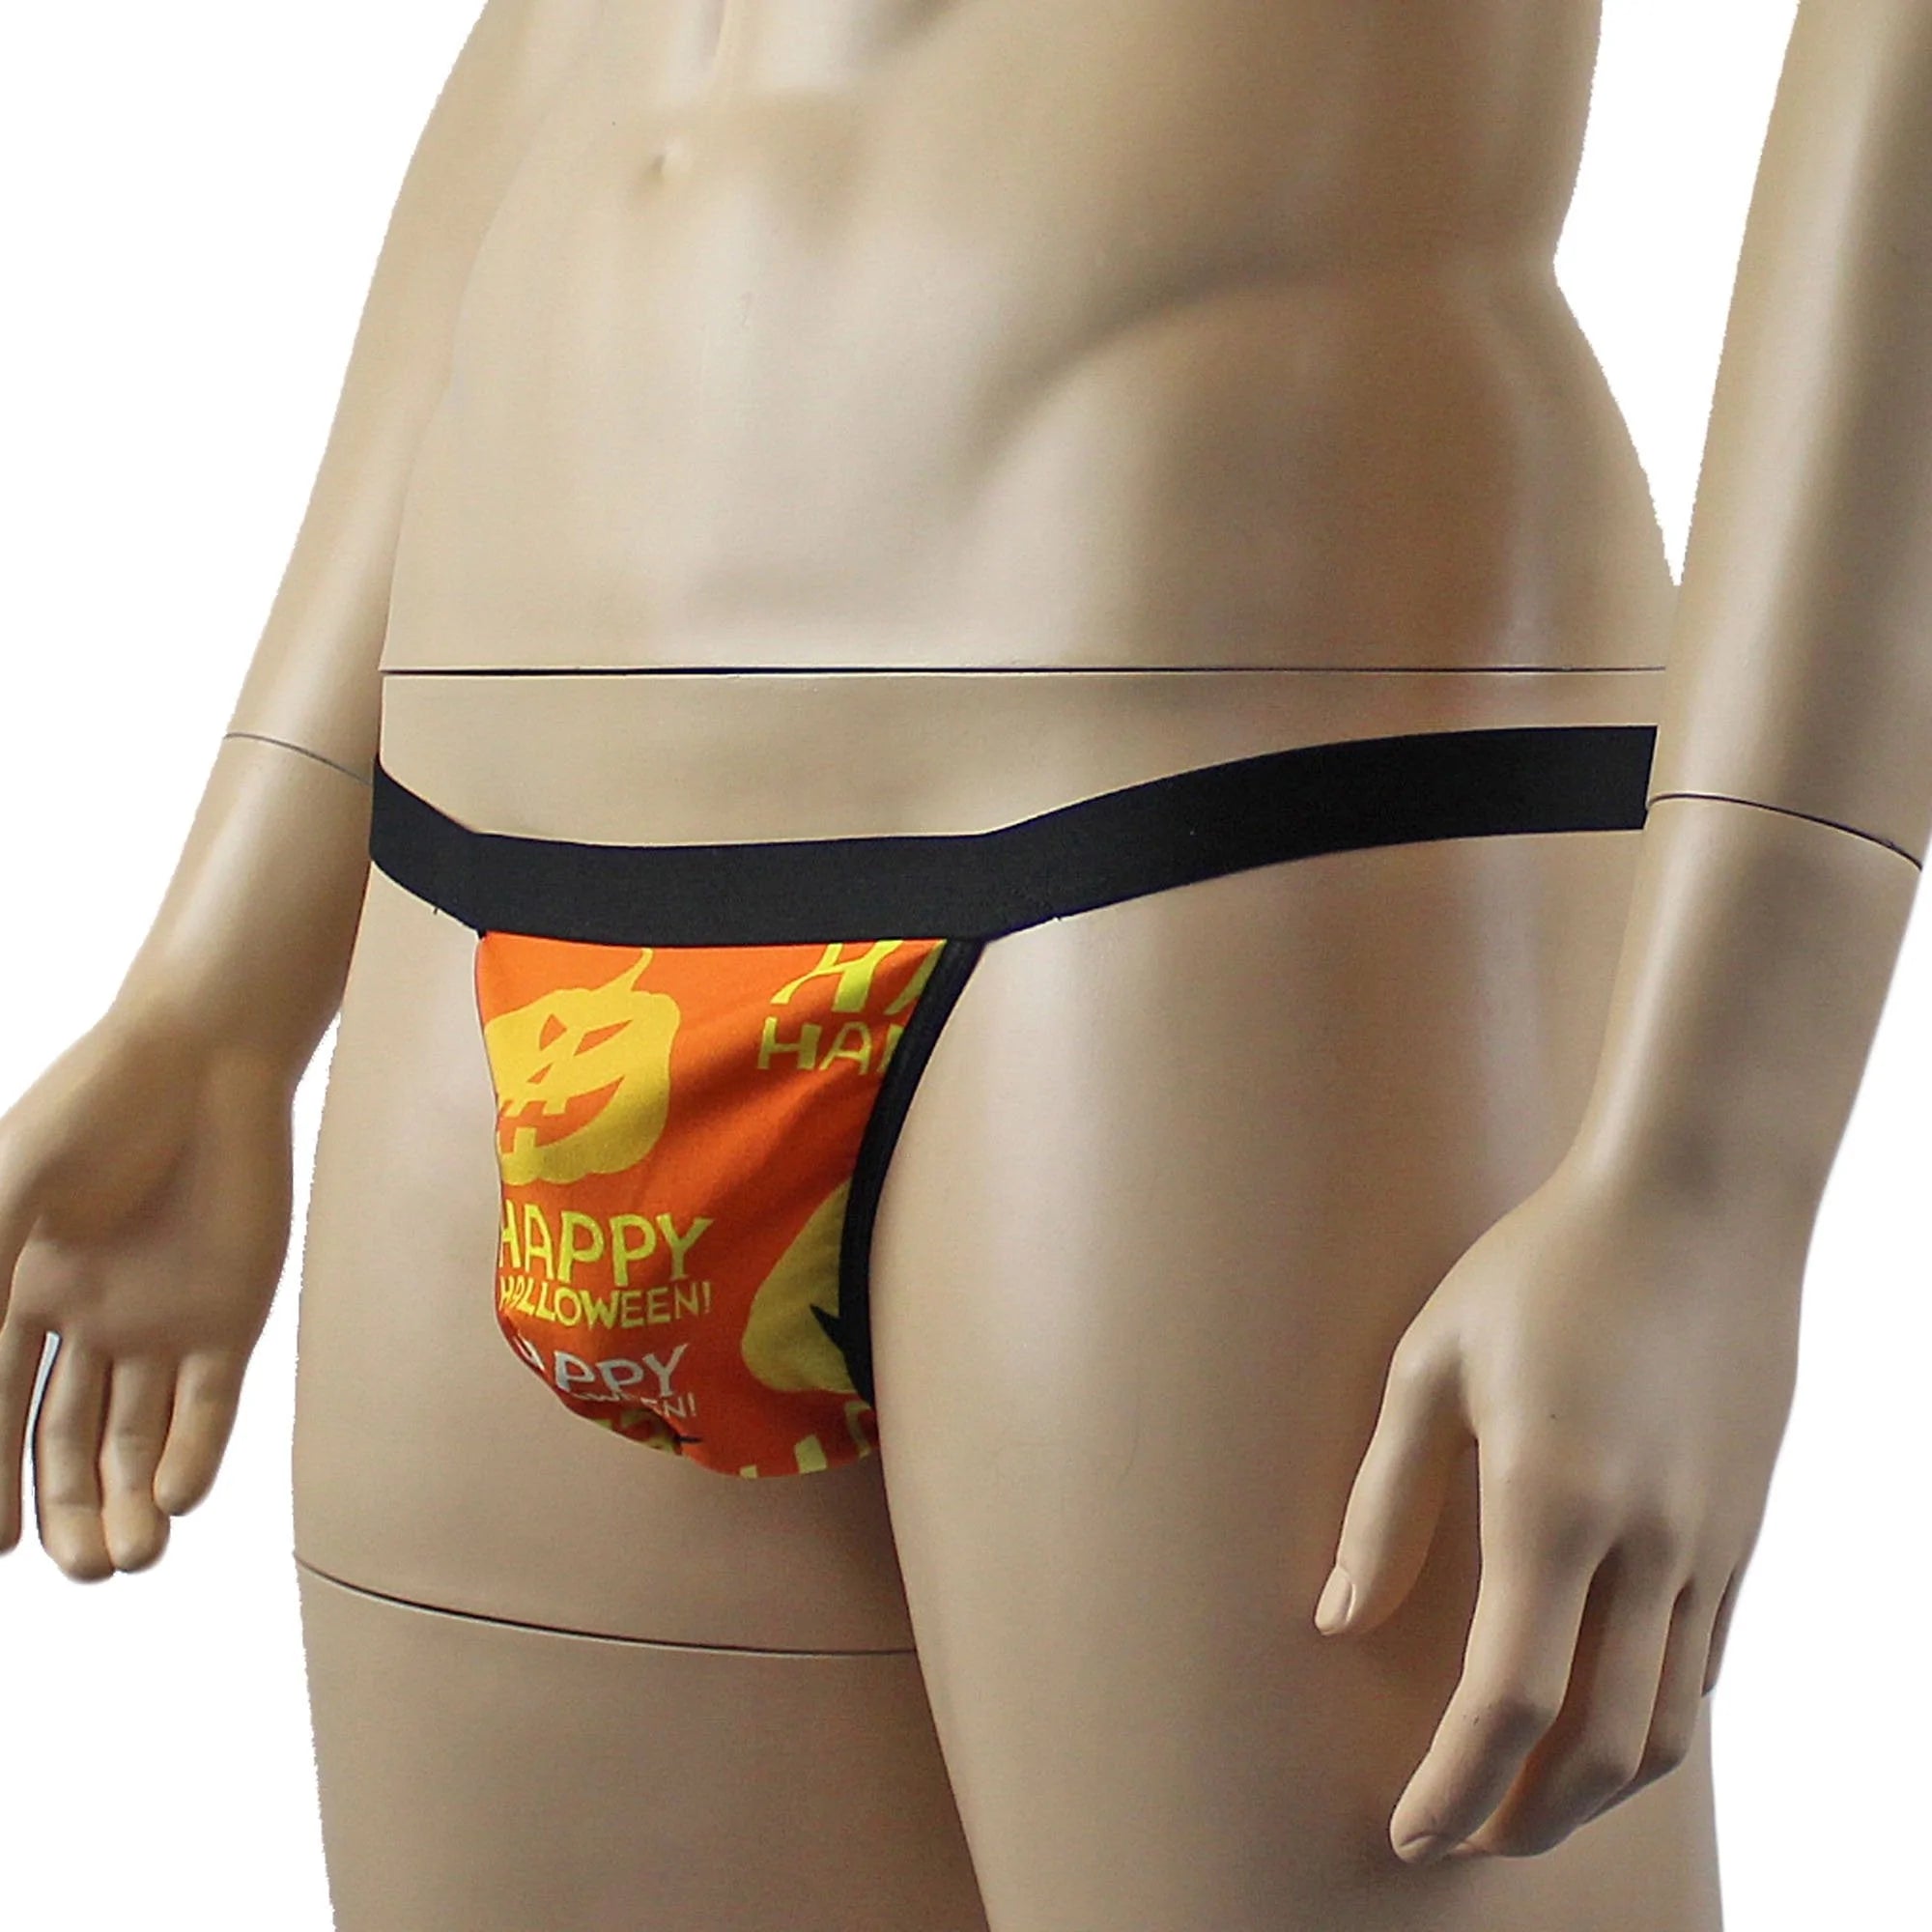 SALE - Mens Happy Halloween Pouch G string Thong with Elastic Band